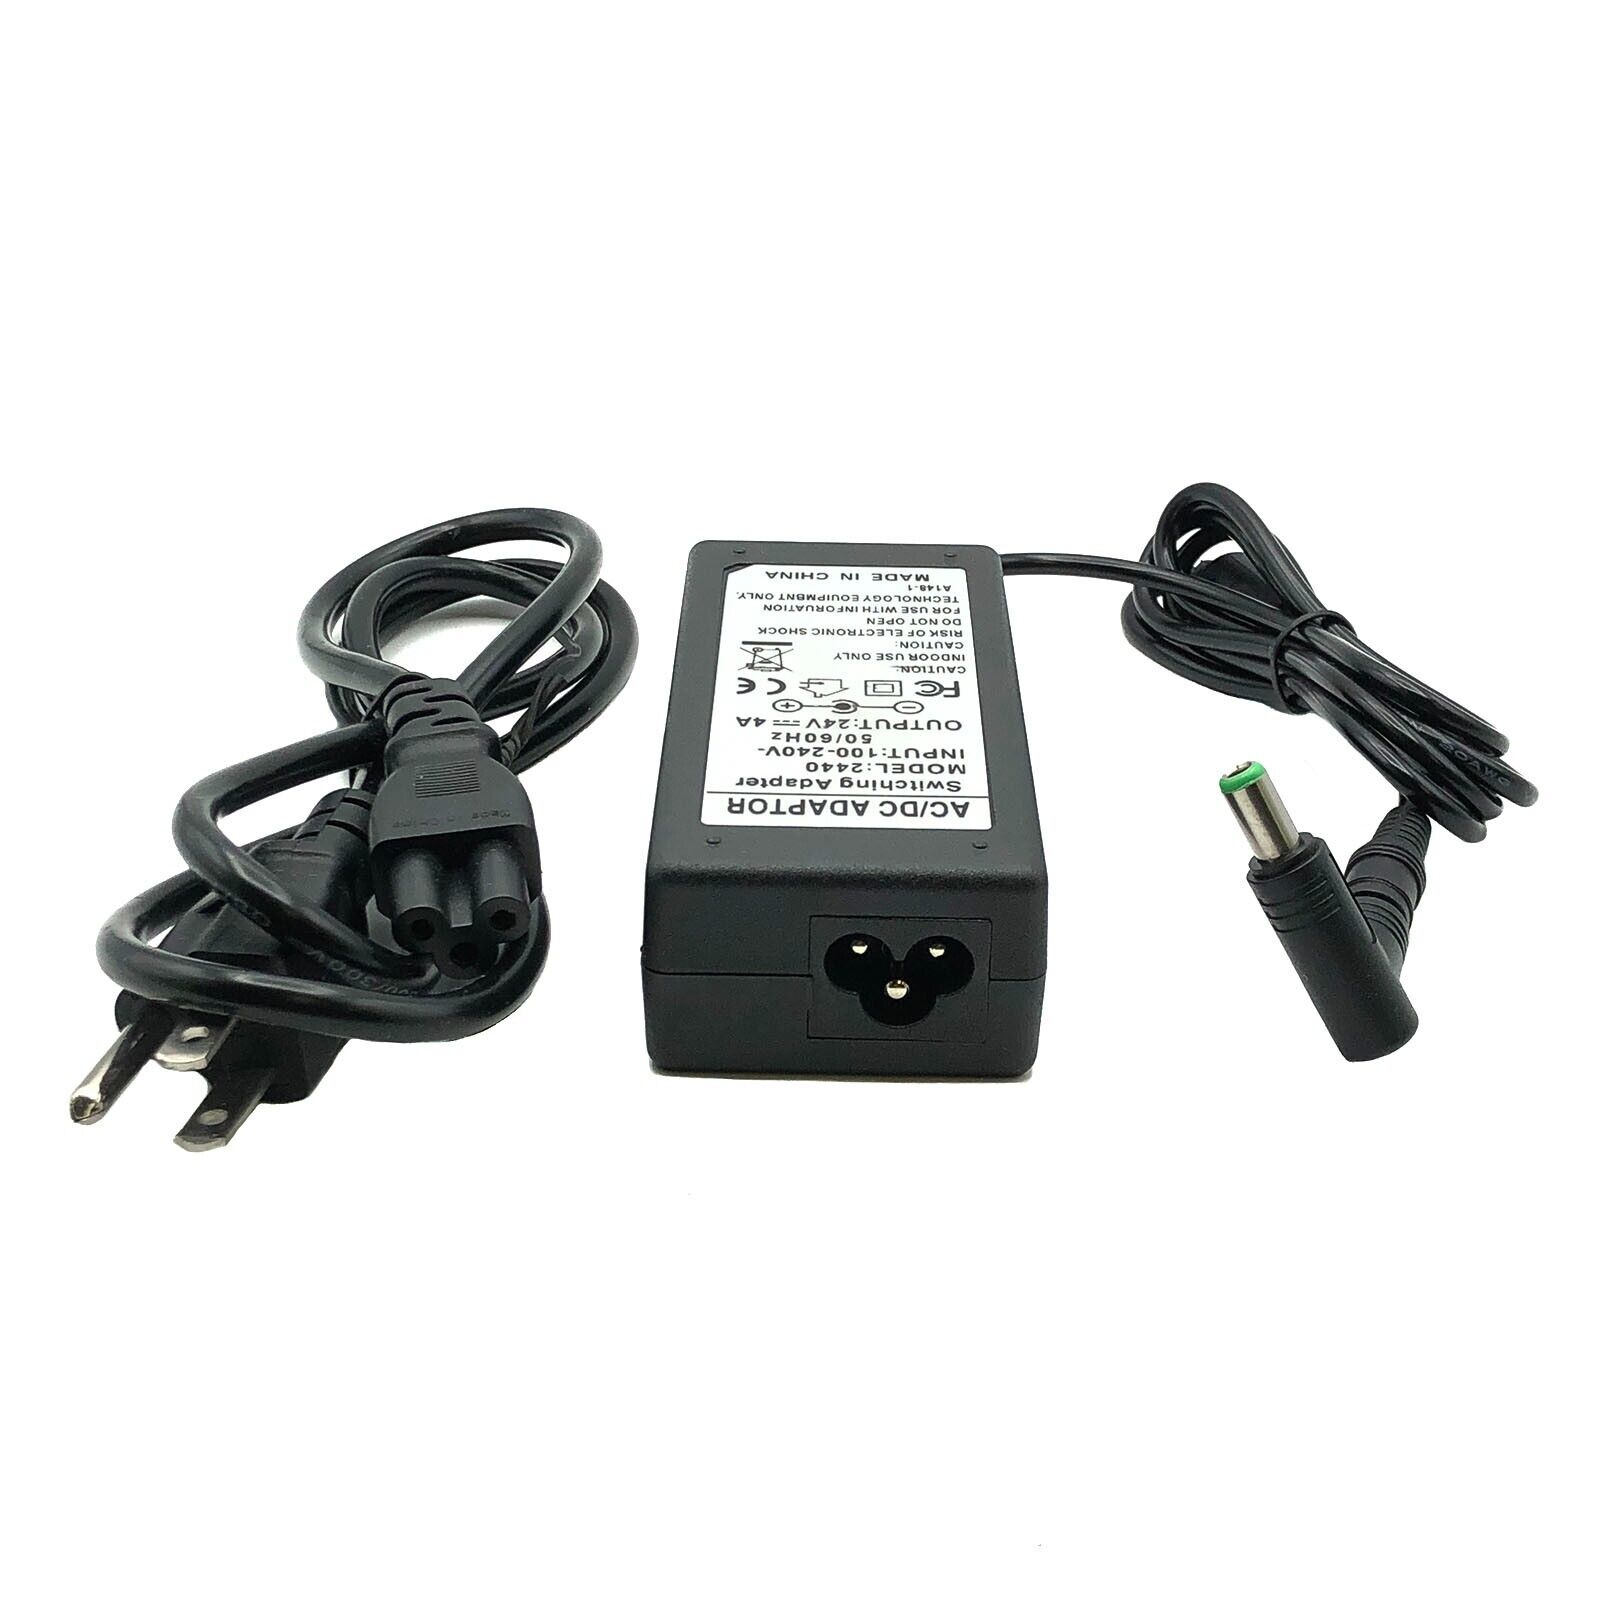 *Brand NEW*24V 4A AC DC Adapter for Zebra GX420t GX430t ZP450 GT800 GT810 Power Supply - Click Image to Close